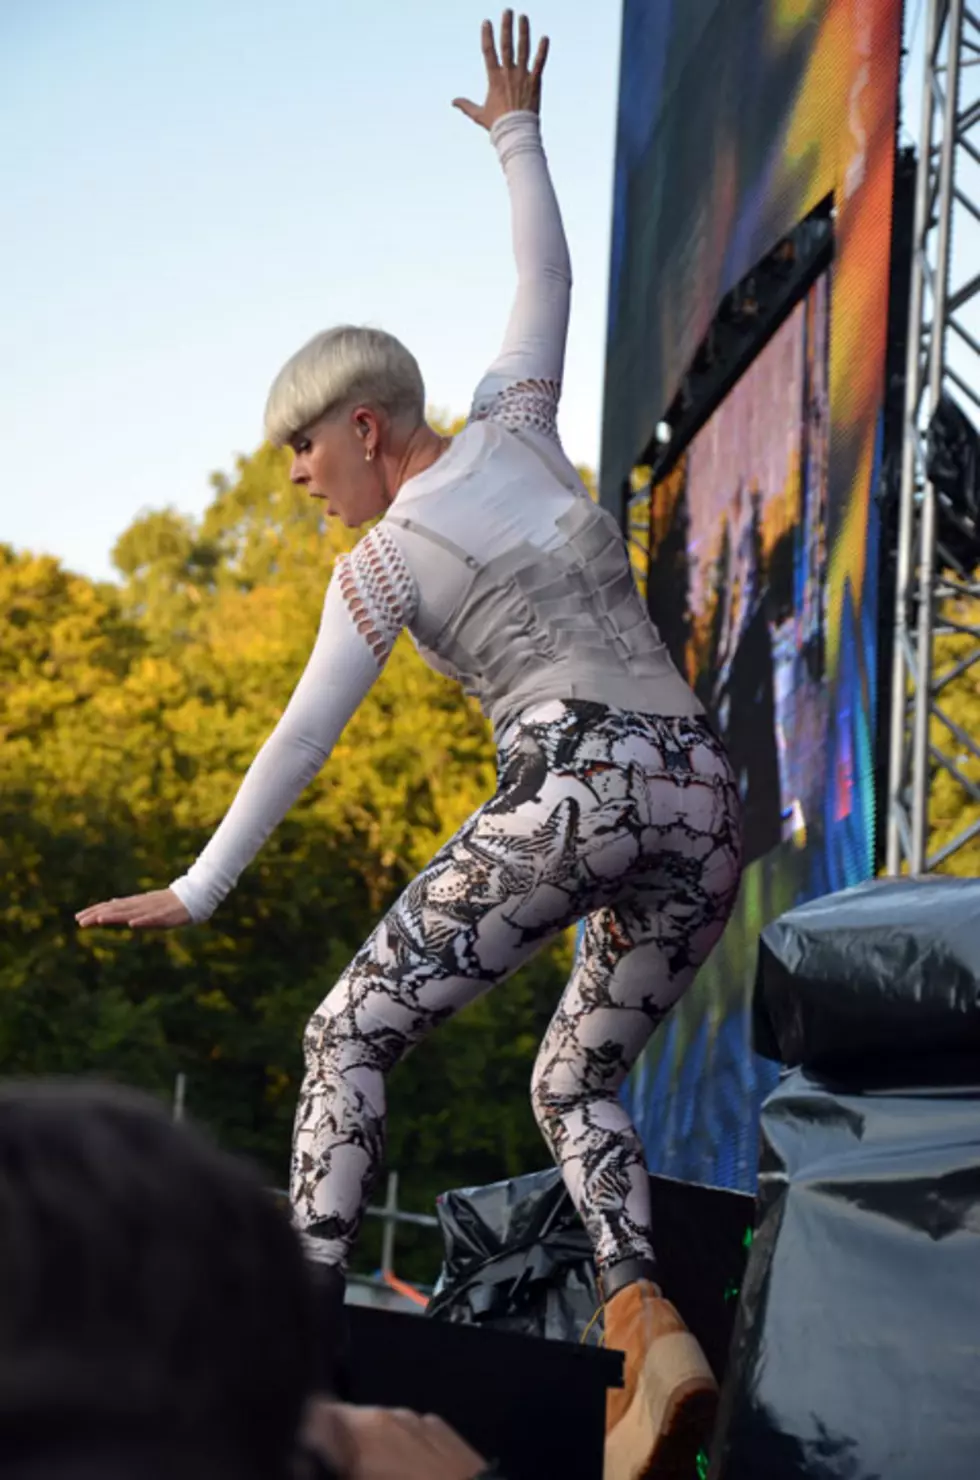 Robyn headlining ACL Live during tour w/ Coldplay (dates)